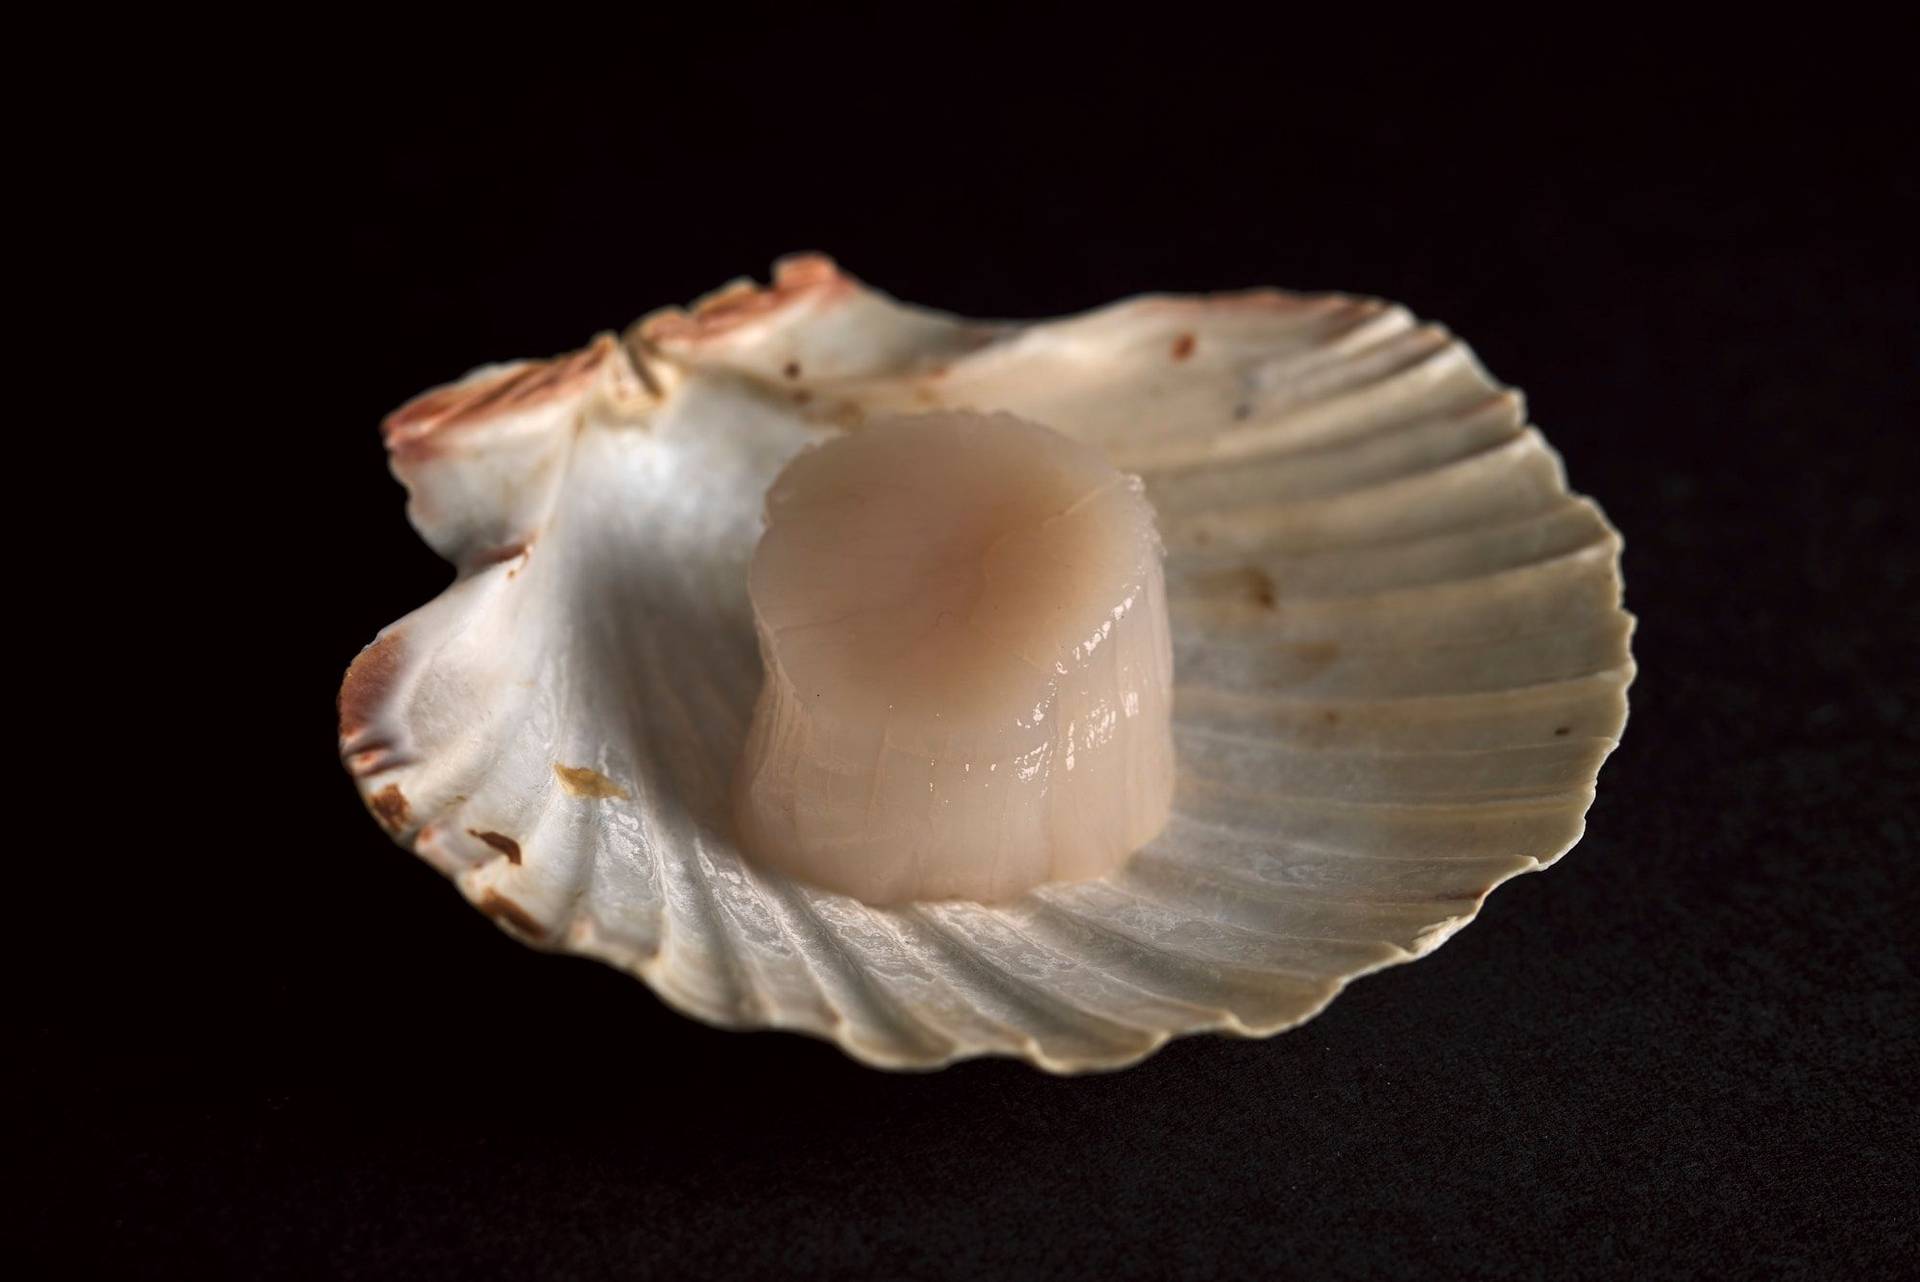 a scallop in its shell on black background